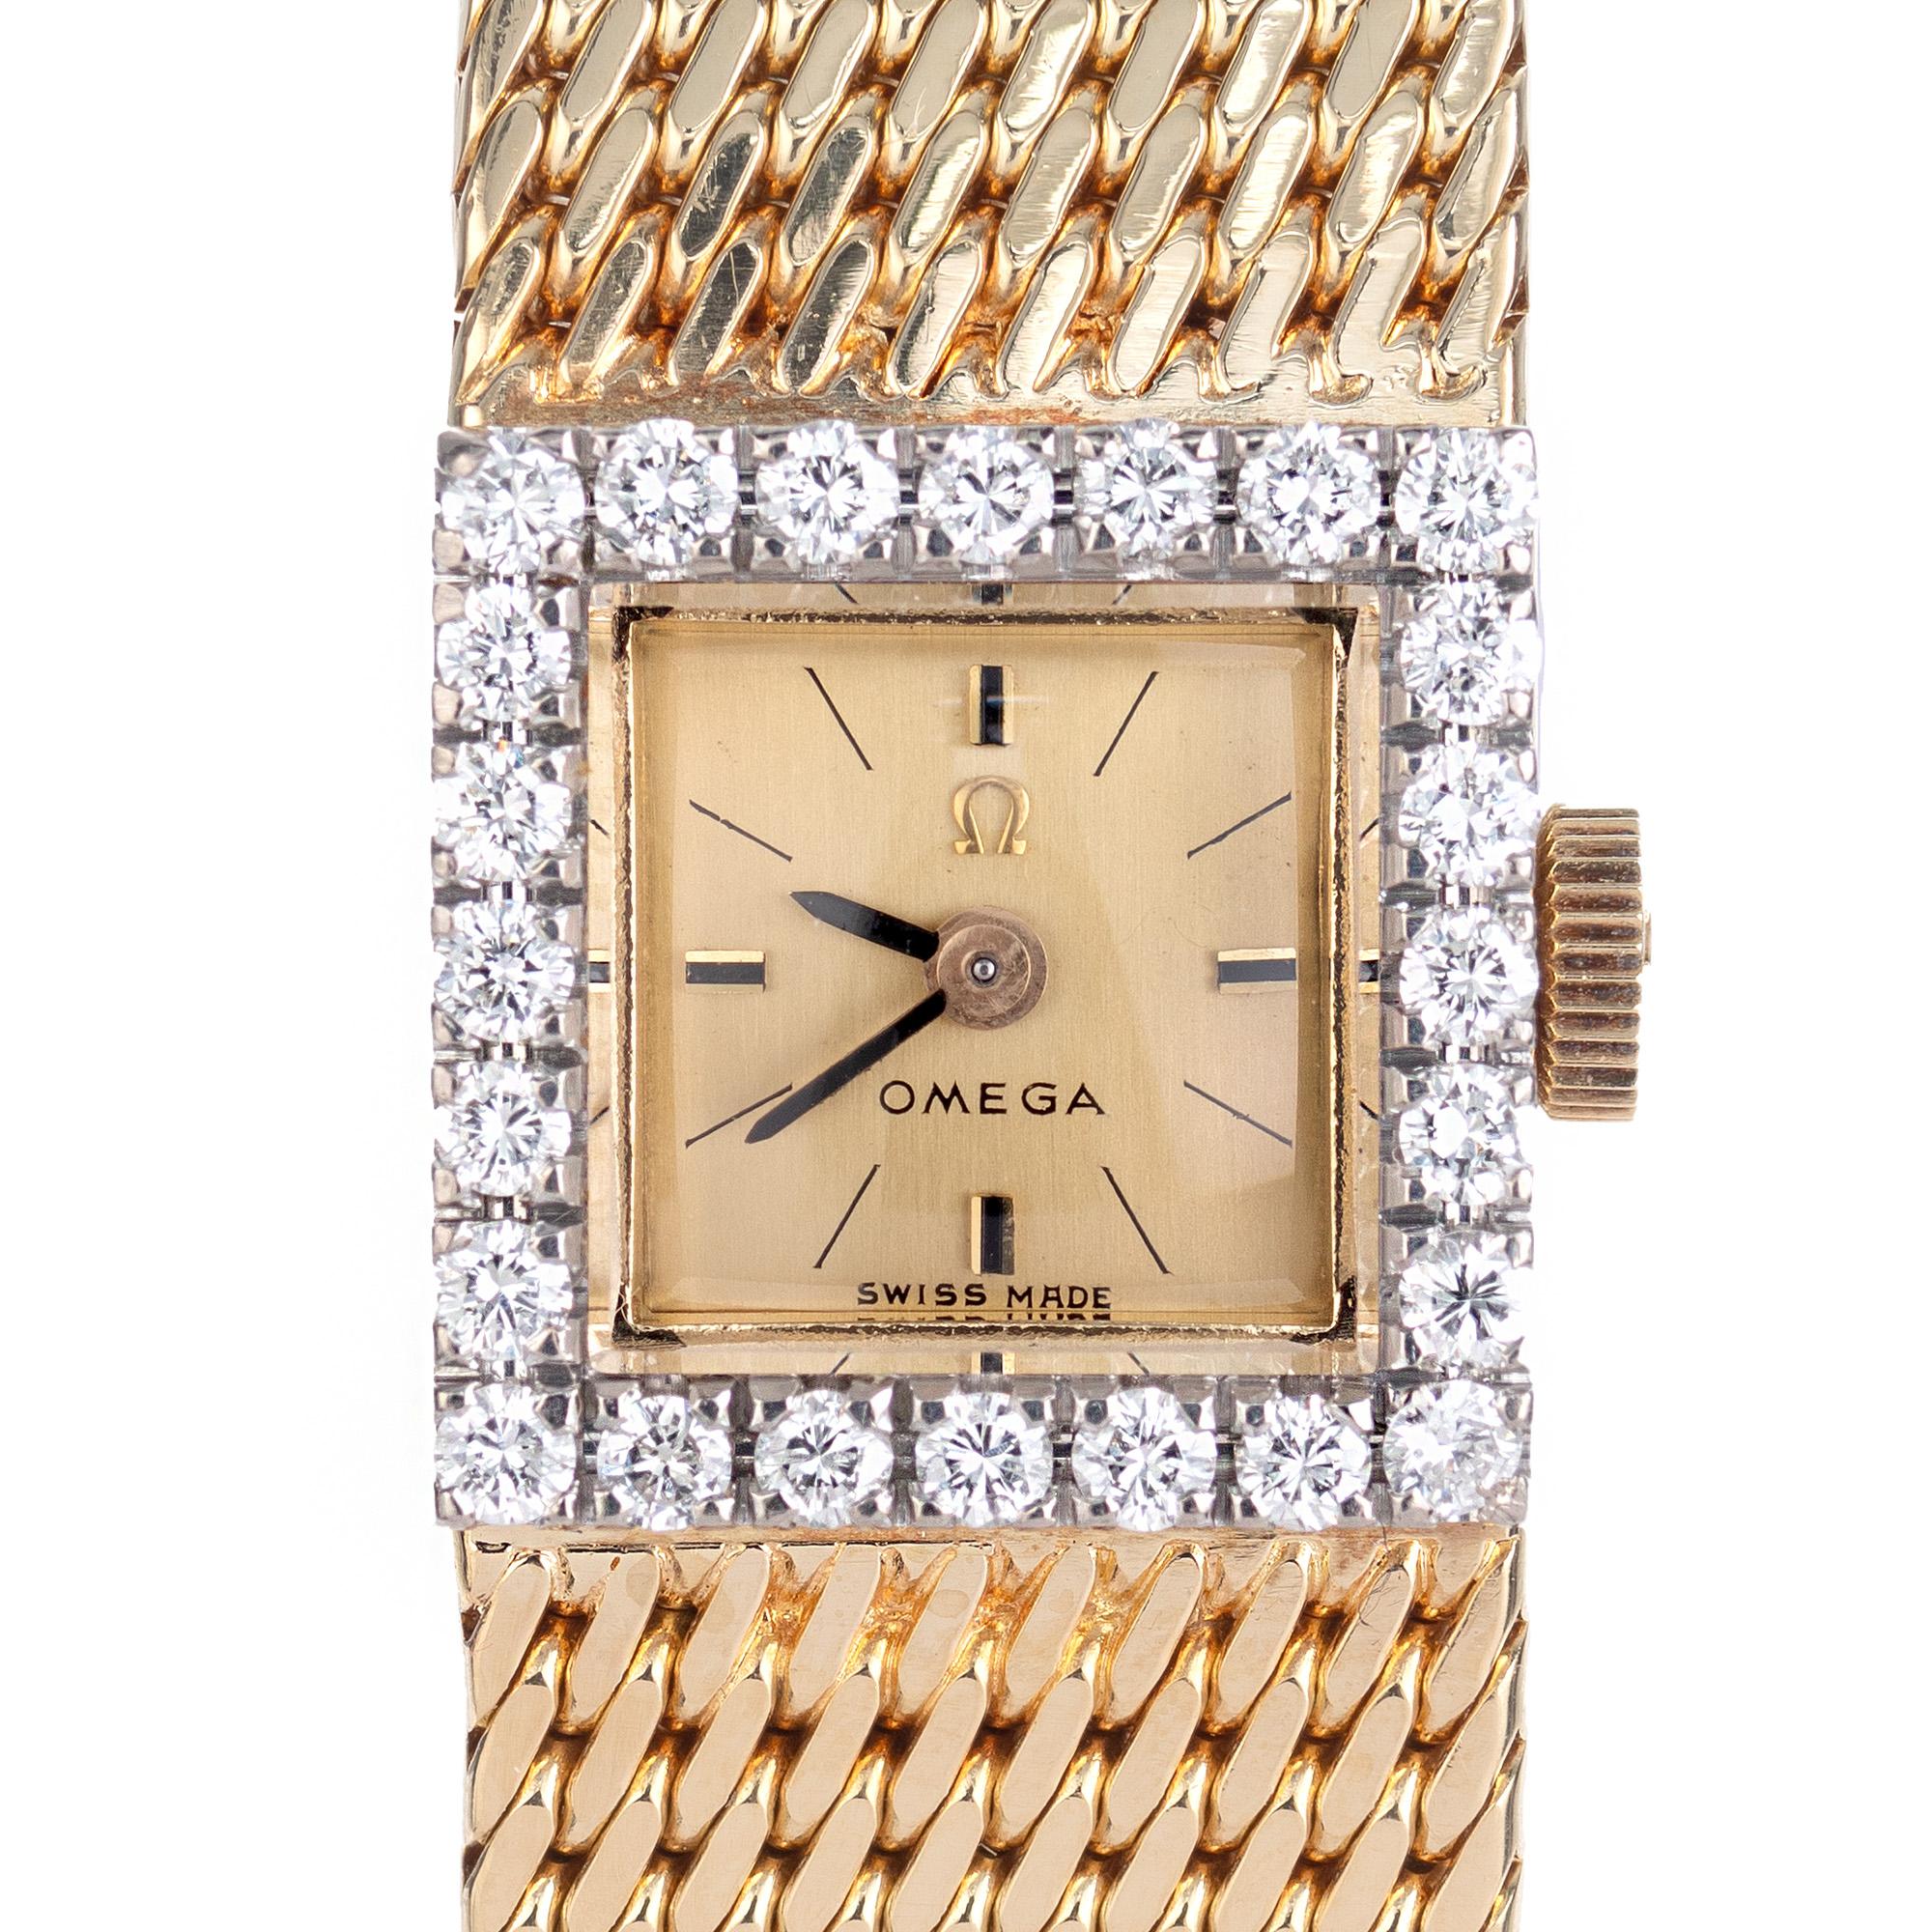 Ladies late 1960's Omega diamond dress wristwatch. Crafted in 18k yellow gold accented with a 24 round cut diamonds along the bezel which are set in 18k white gold. Solid Omega mesh band. 

24 round diamonds, G-VS approx. .48cts
18k yellow gold 
56